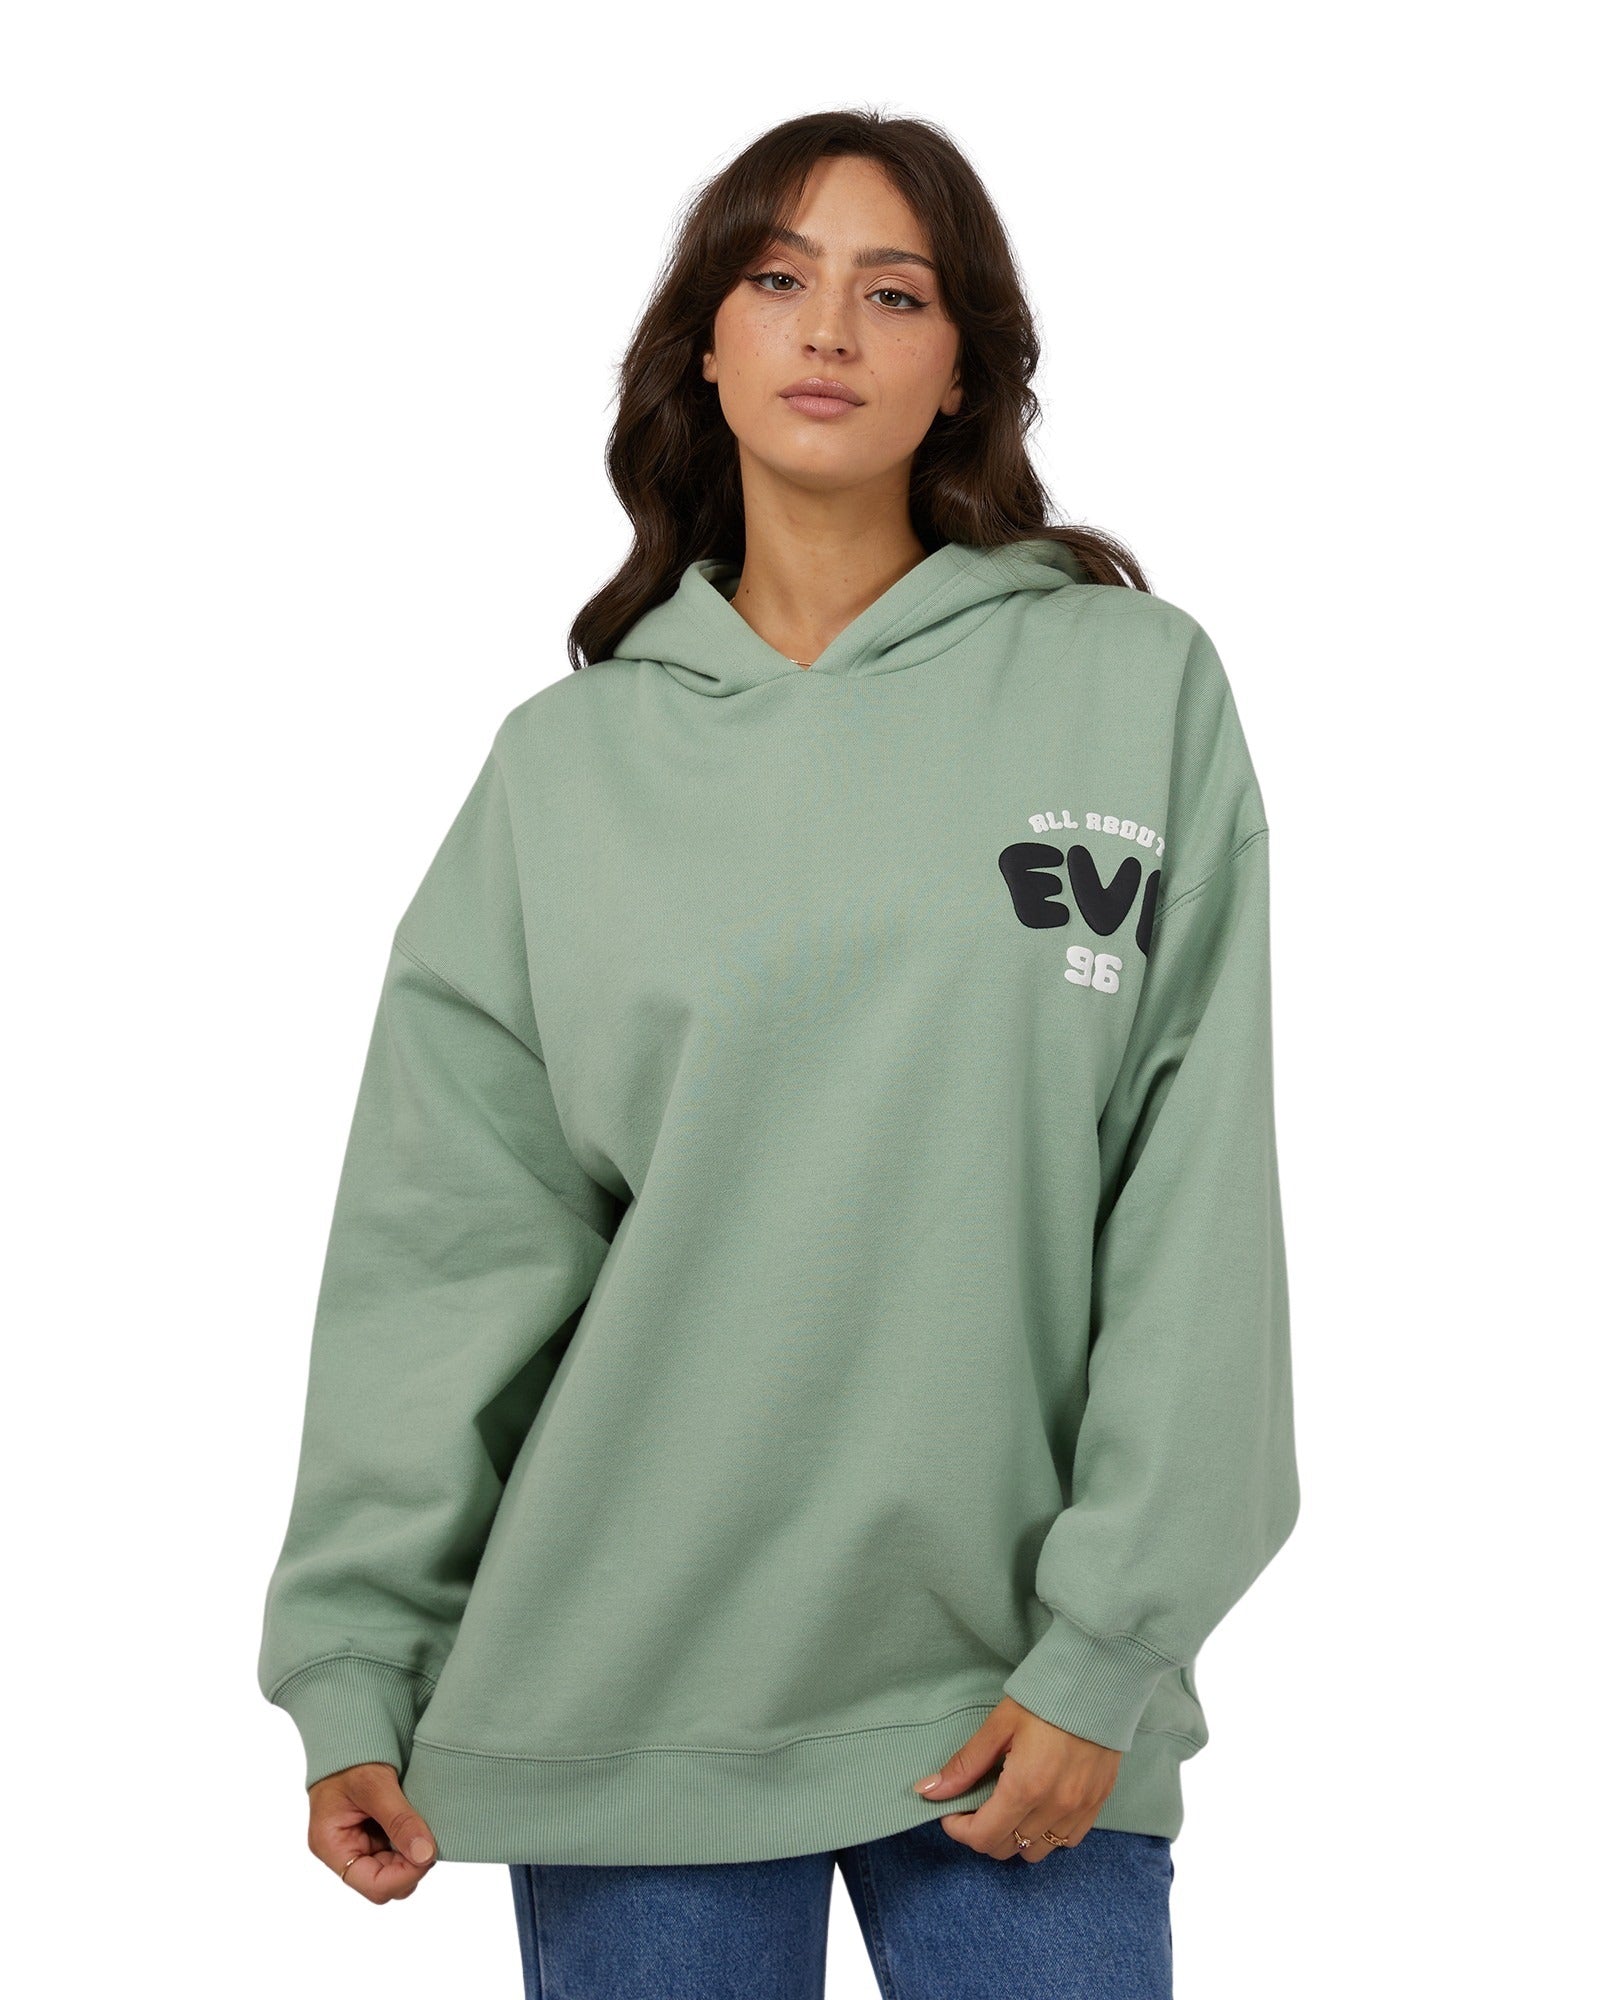 All About Eve - Exhale Hoody - Sage